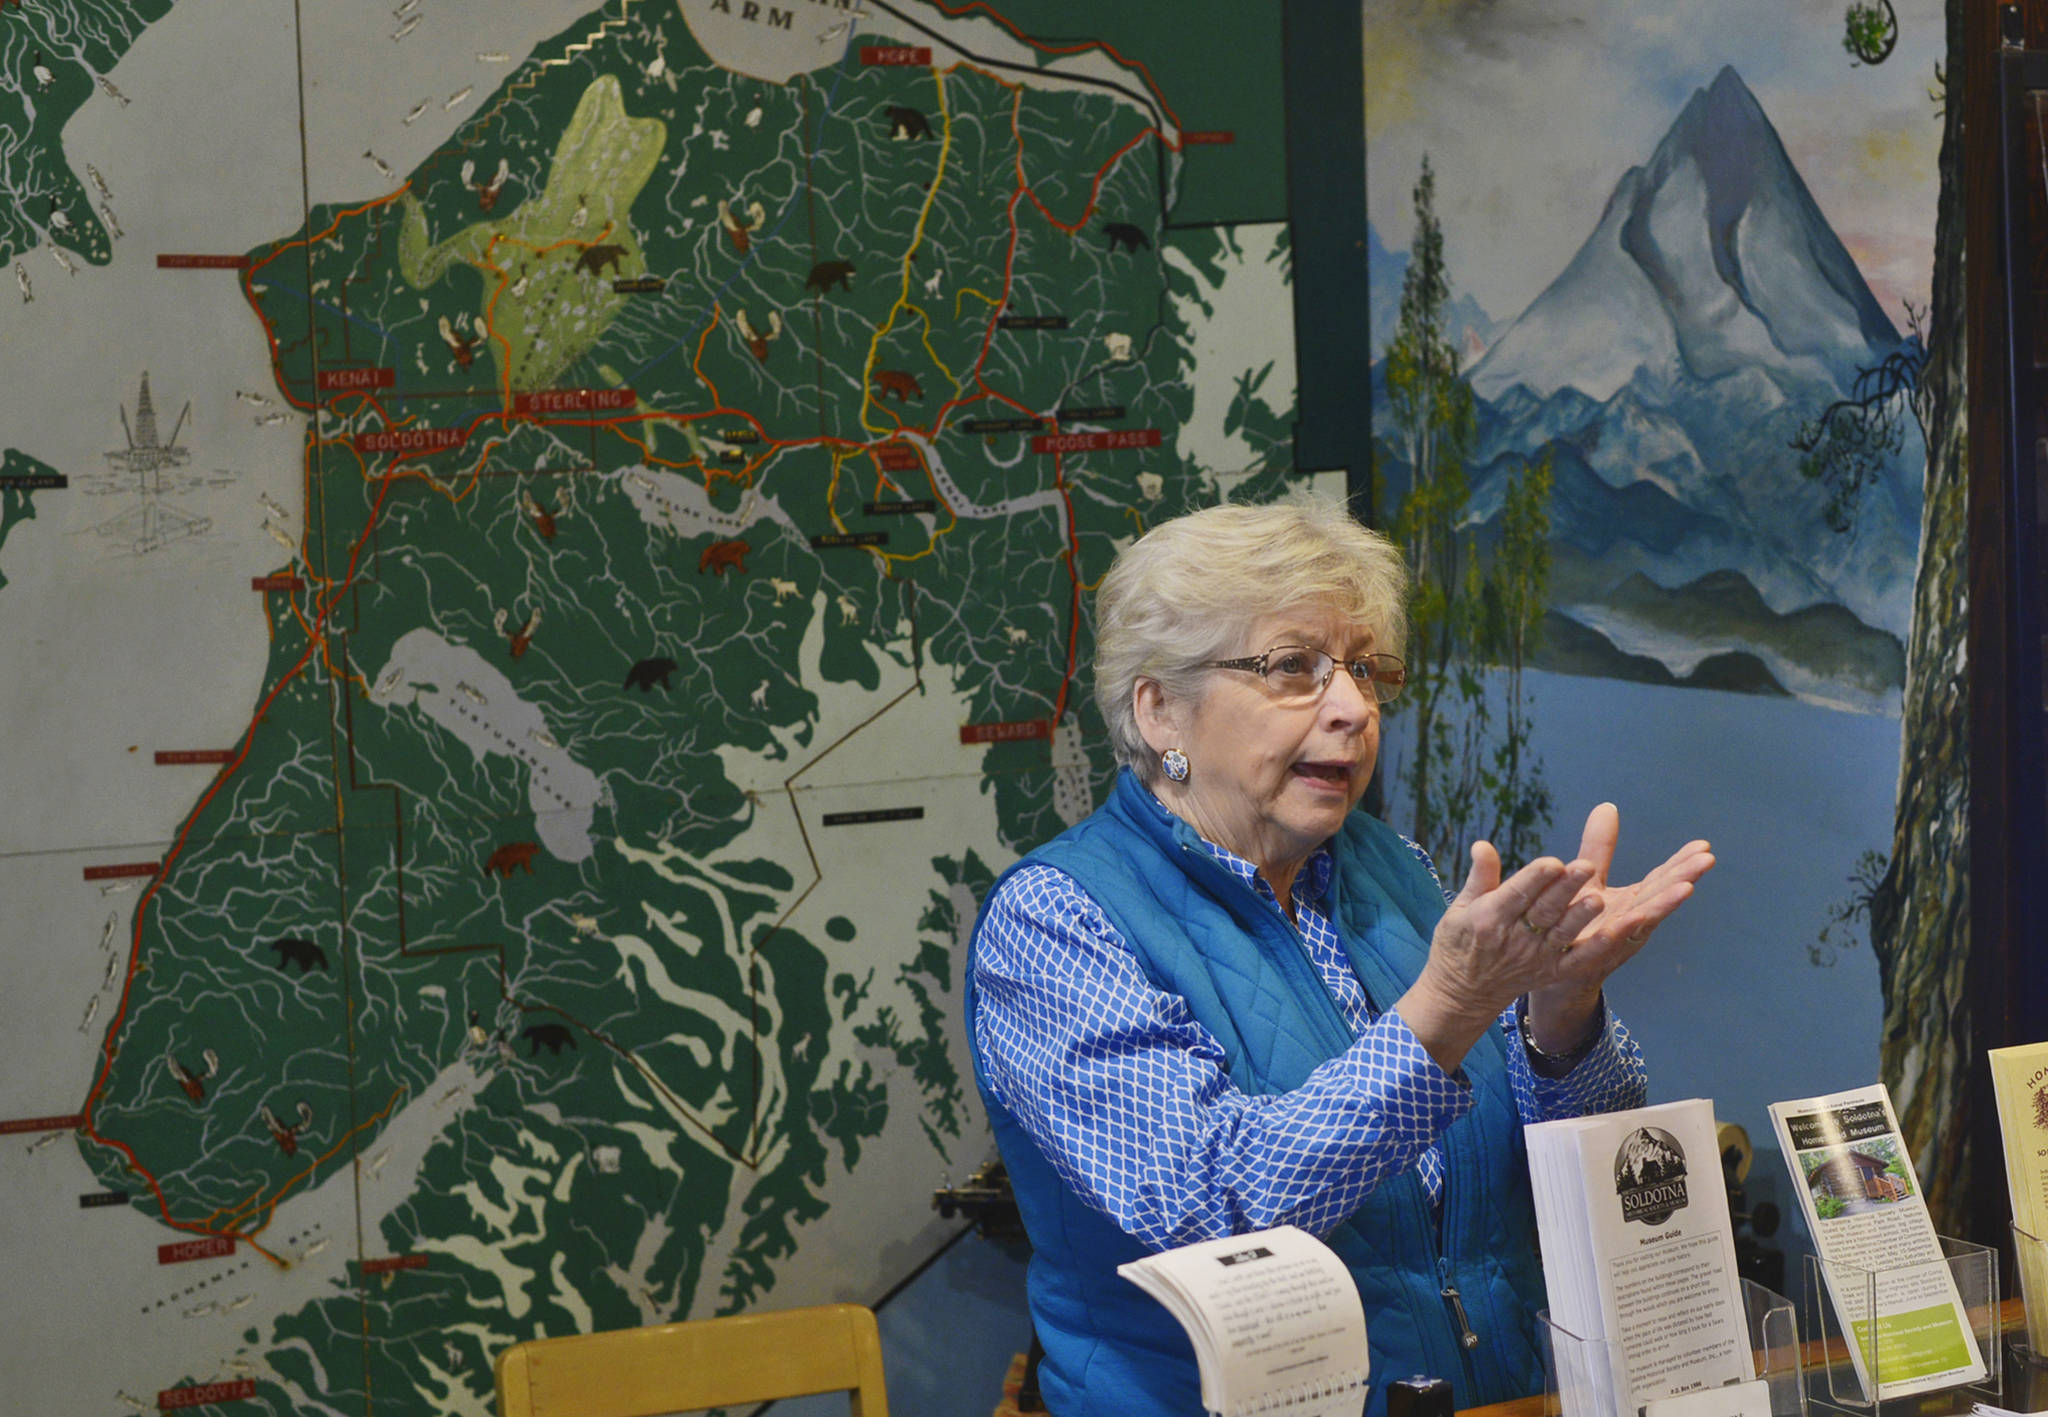 Docent Carroll Knutson describes Alaska’s 1964 earthquake to visitors of the Soldotna Historical Society Museum on Tuesday, July 17, 2018 in Soldotna, Alaska. The Historical Society will be kicking off this year’s Soldotna Progress Days celebration on July 27 with a free community barbecue featuring several of Soldotna’s early settlers and their descendants. Knutson, whose family began homesteading about eight miles south of Soldotna in 1958, will be among those telling stories and leading tours through the museum’s collection of homesteader cabins and exhibits of artifacts. The event, from 4 p.m to 7 p.m, will also include music from Hobo Jim, a dutch oven demonstration, and children’s scavenger hunts. (Ben Boettger/Peninsula Clarion)